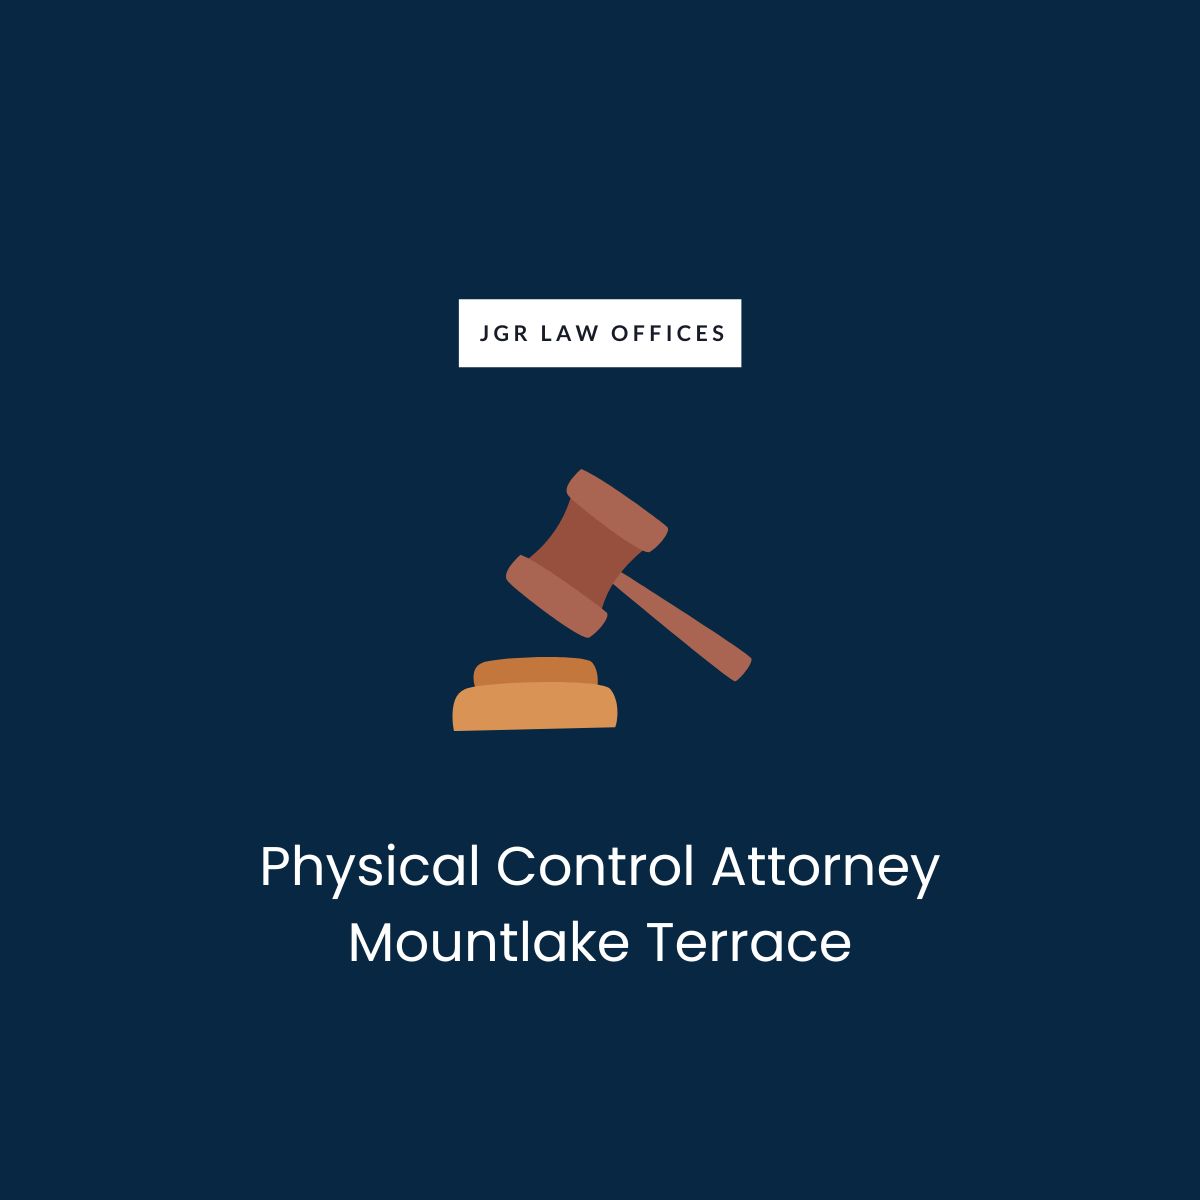 Physical Control Attorney Mountlake Terrace